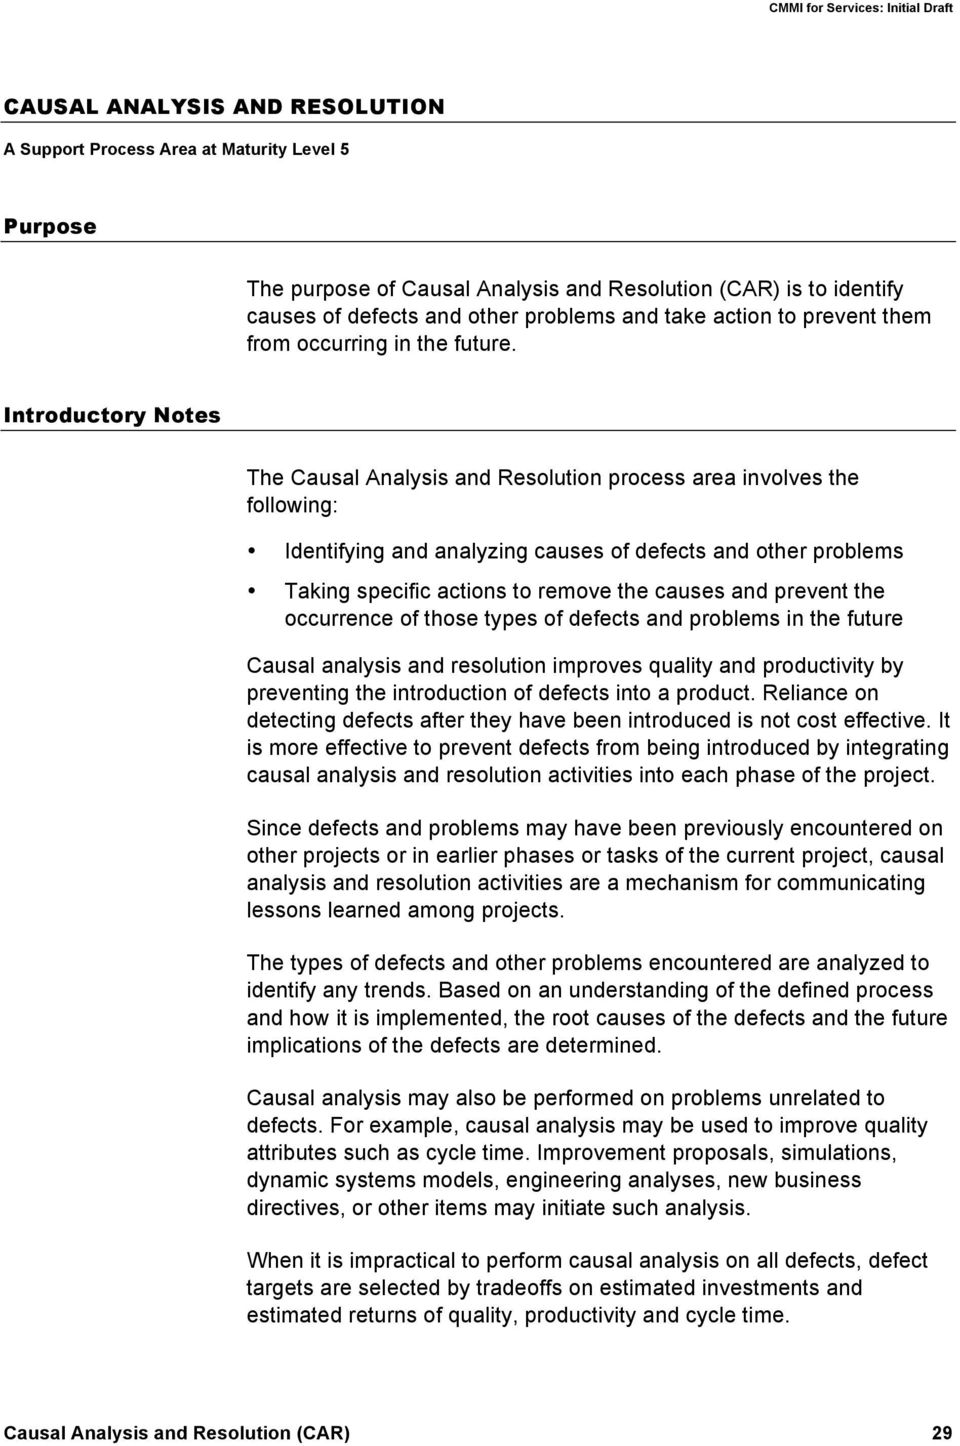 Introductory Notes The Causal Analysis and Resolution process area involves the following: Identifying and analyzing causes of defects and other problems Taking specific actions to remove the causes